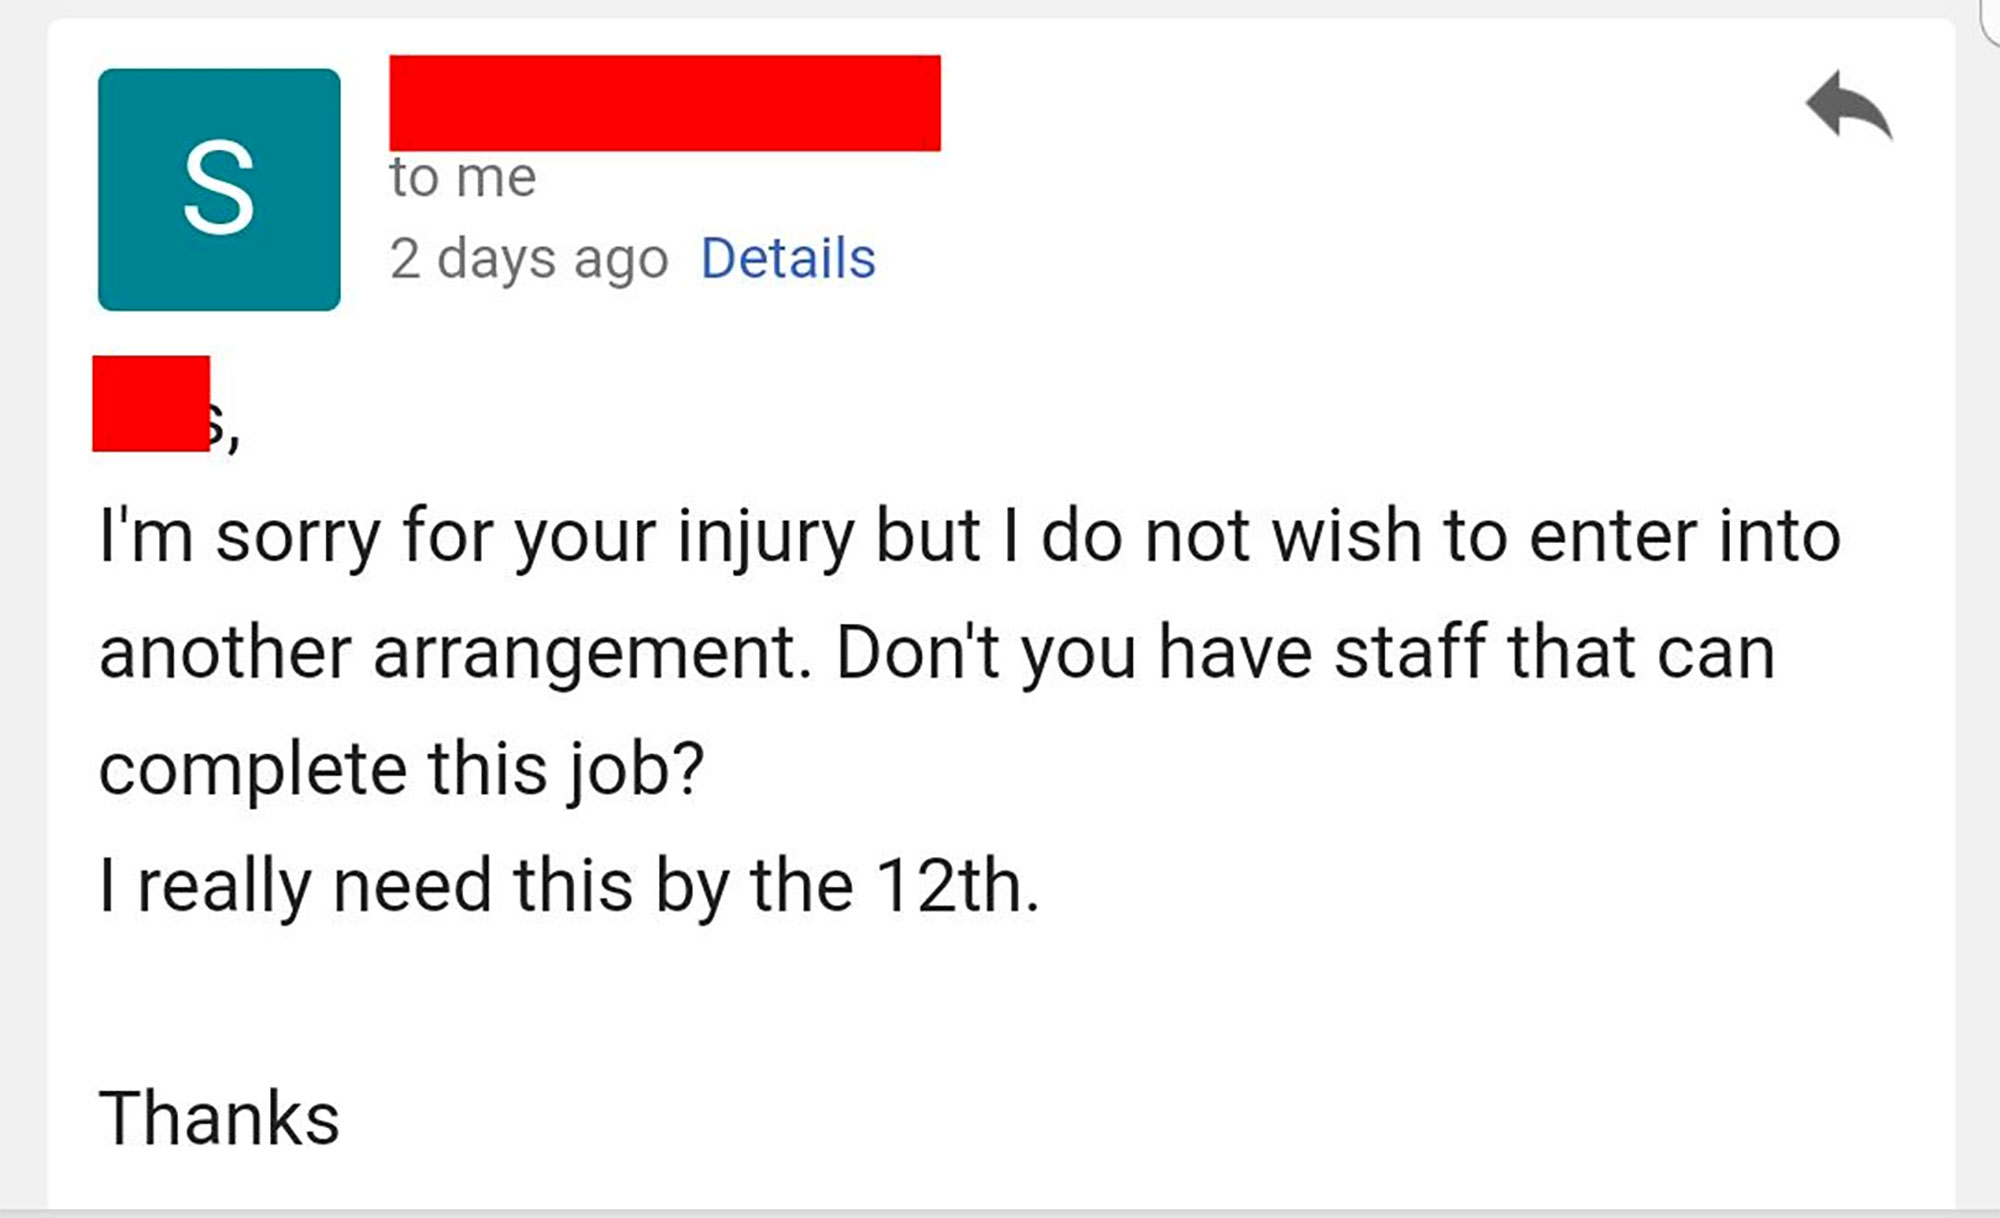 angle - to me 2 days ago Details I'm sorry for your injury but I do not wish to enter into another arrangement. Don't you have staff that can complete this job? I really need this by the 12th. Thanks